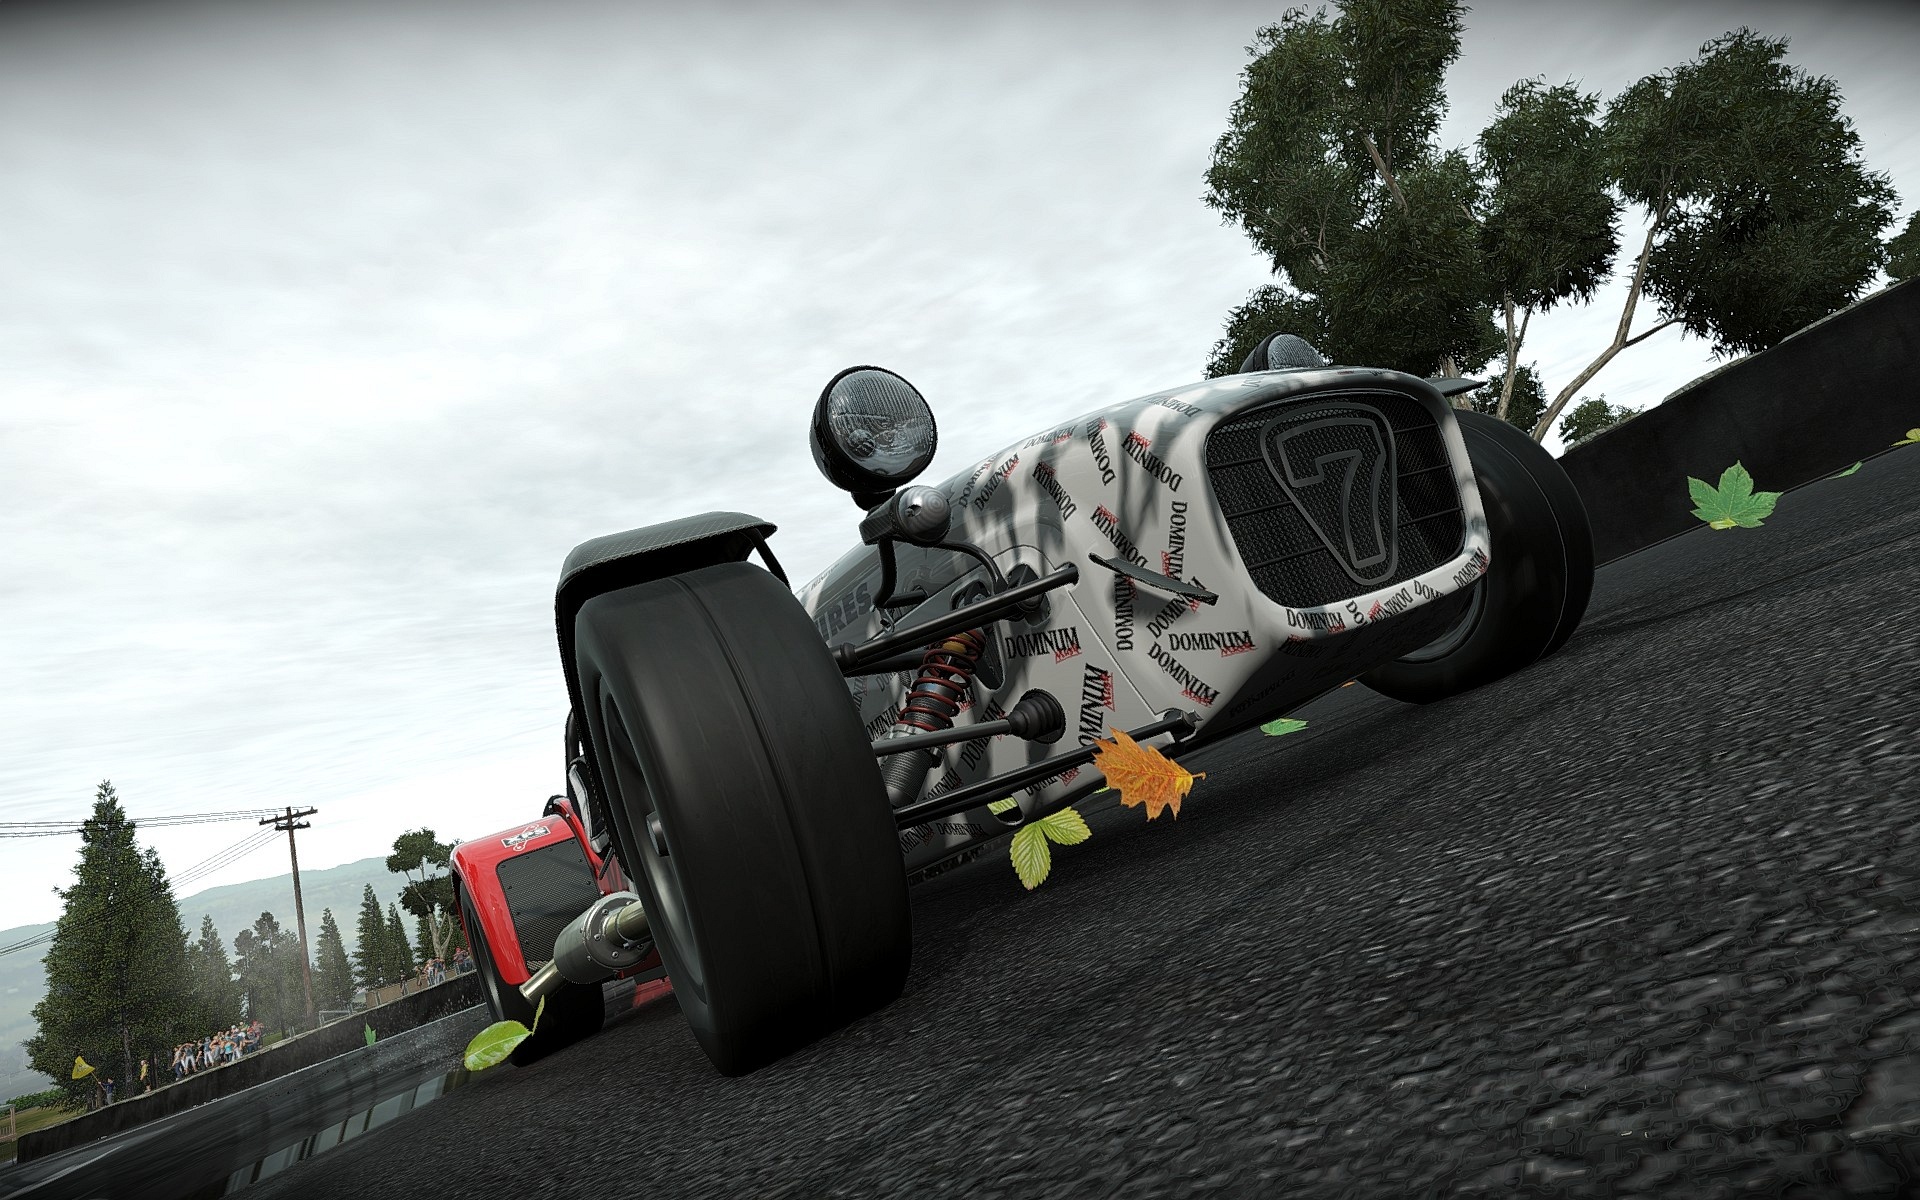 Project cars Скриншоты. Scary Racing game. Картинки Slick Racing game.